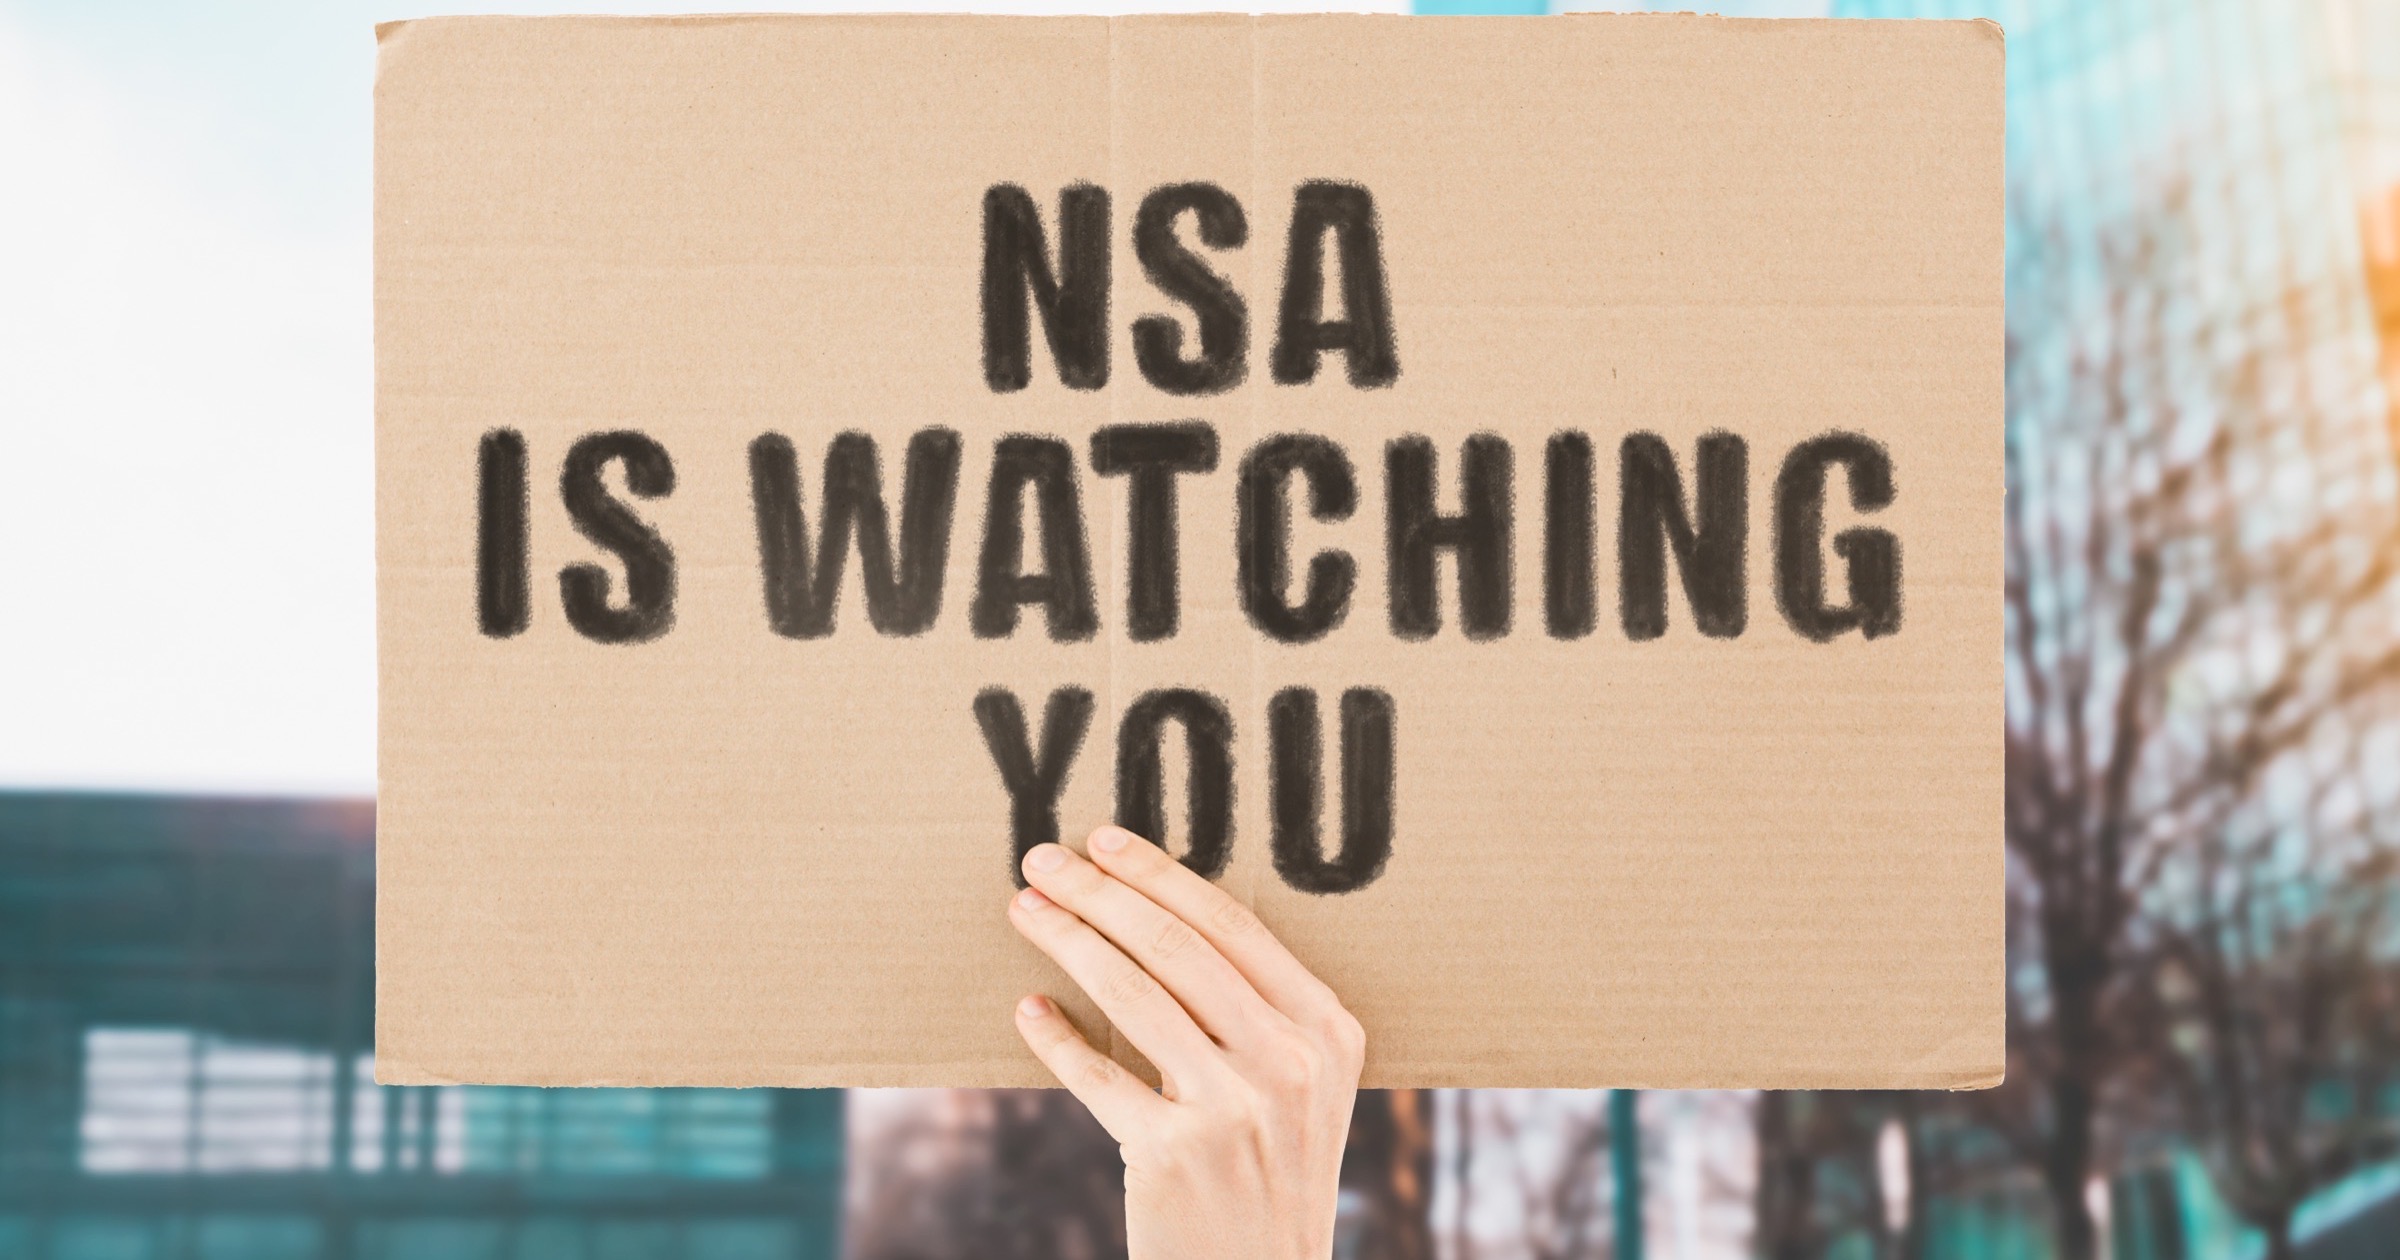 Person holding a sign that says “NSA is watching you.”